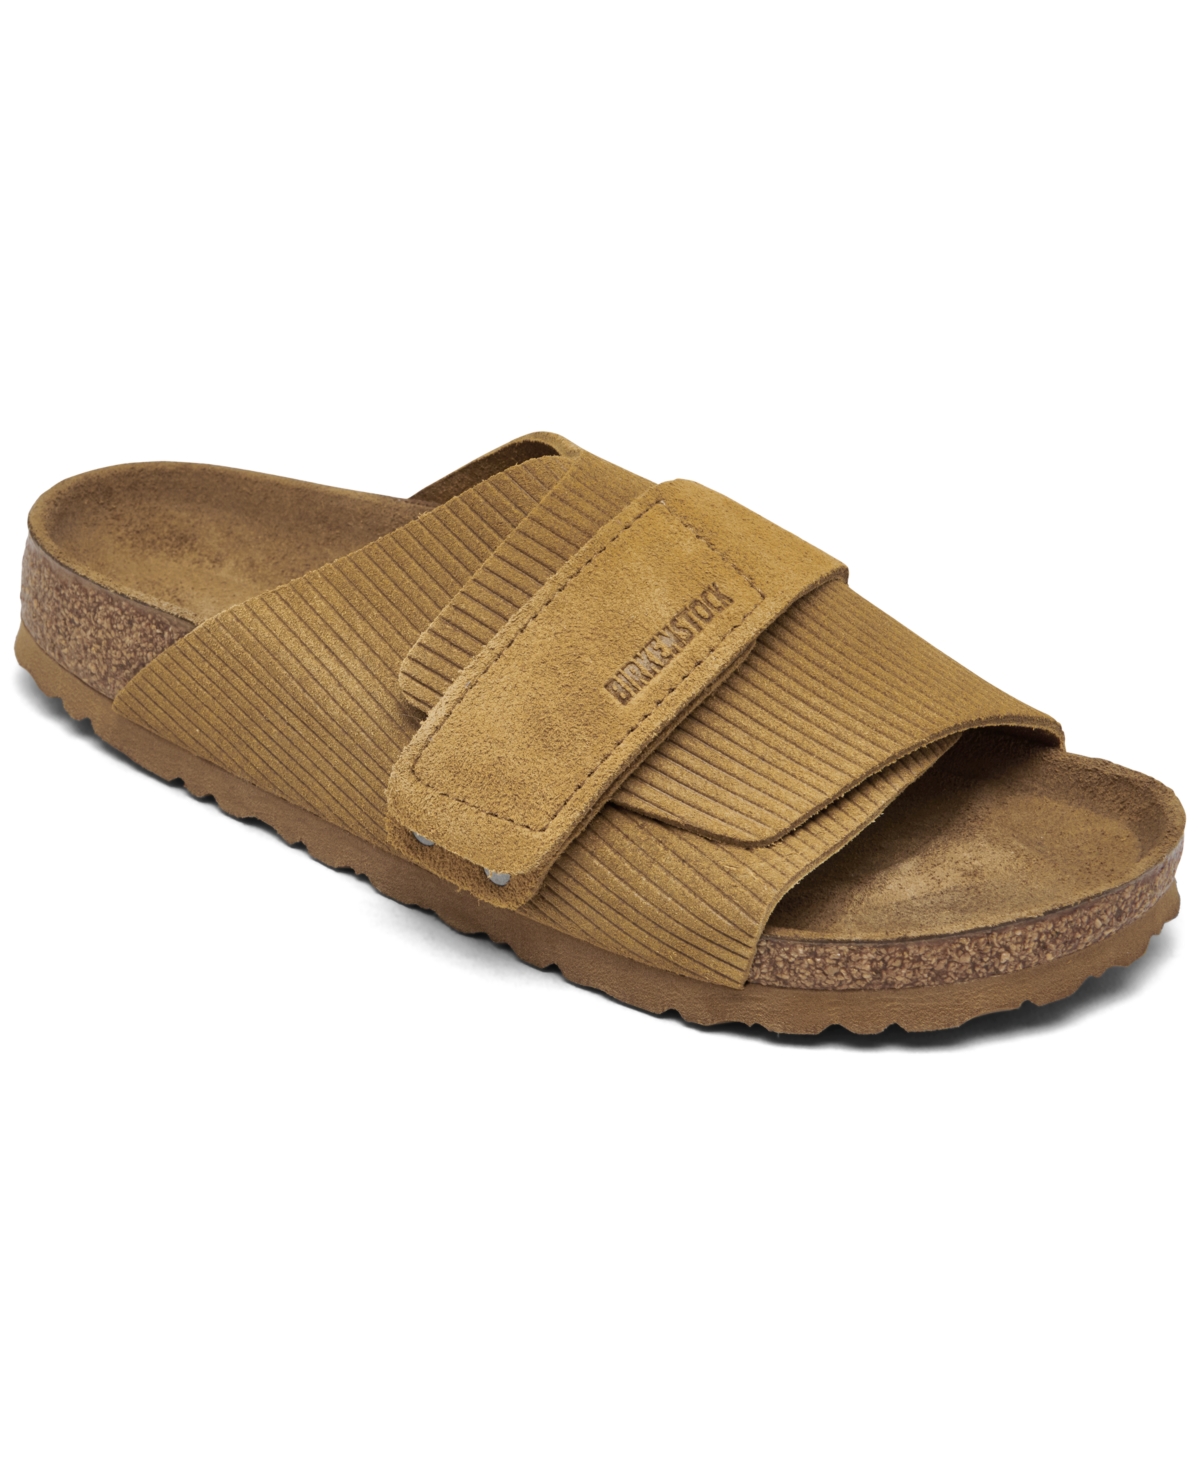 Women's Kyoto Suede Embossed Slide Sandals from Finish Line - Cork Brown